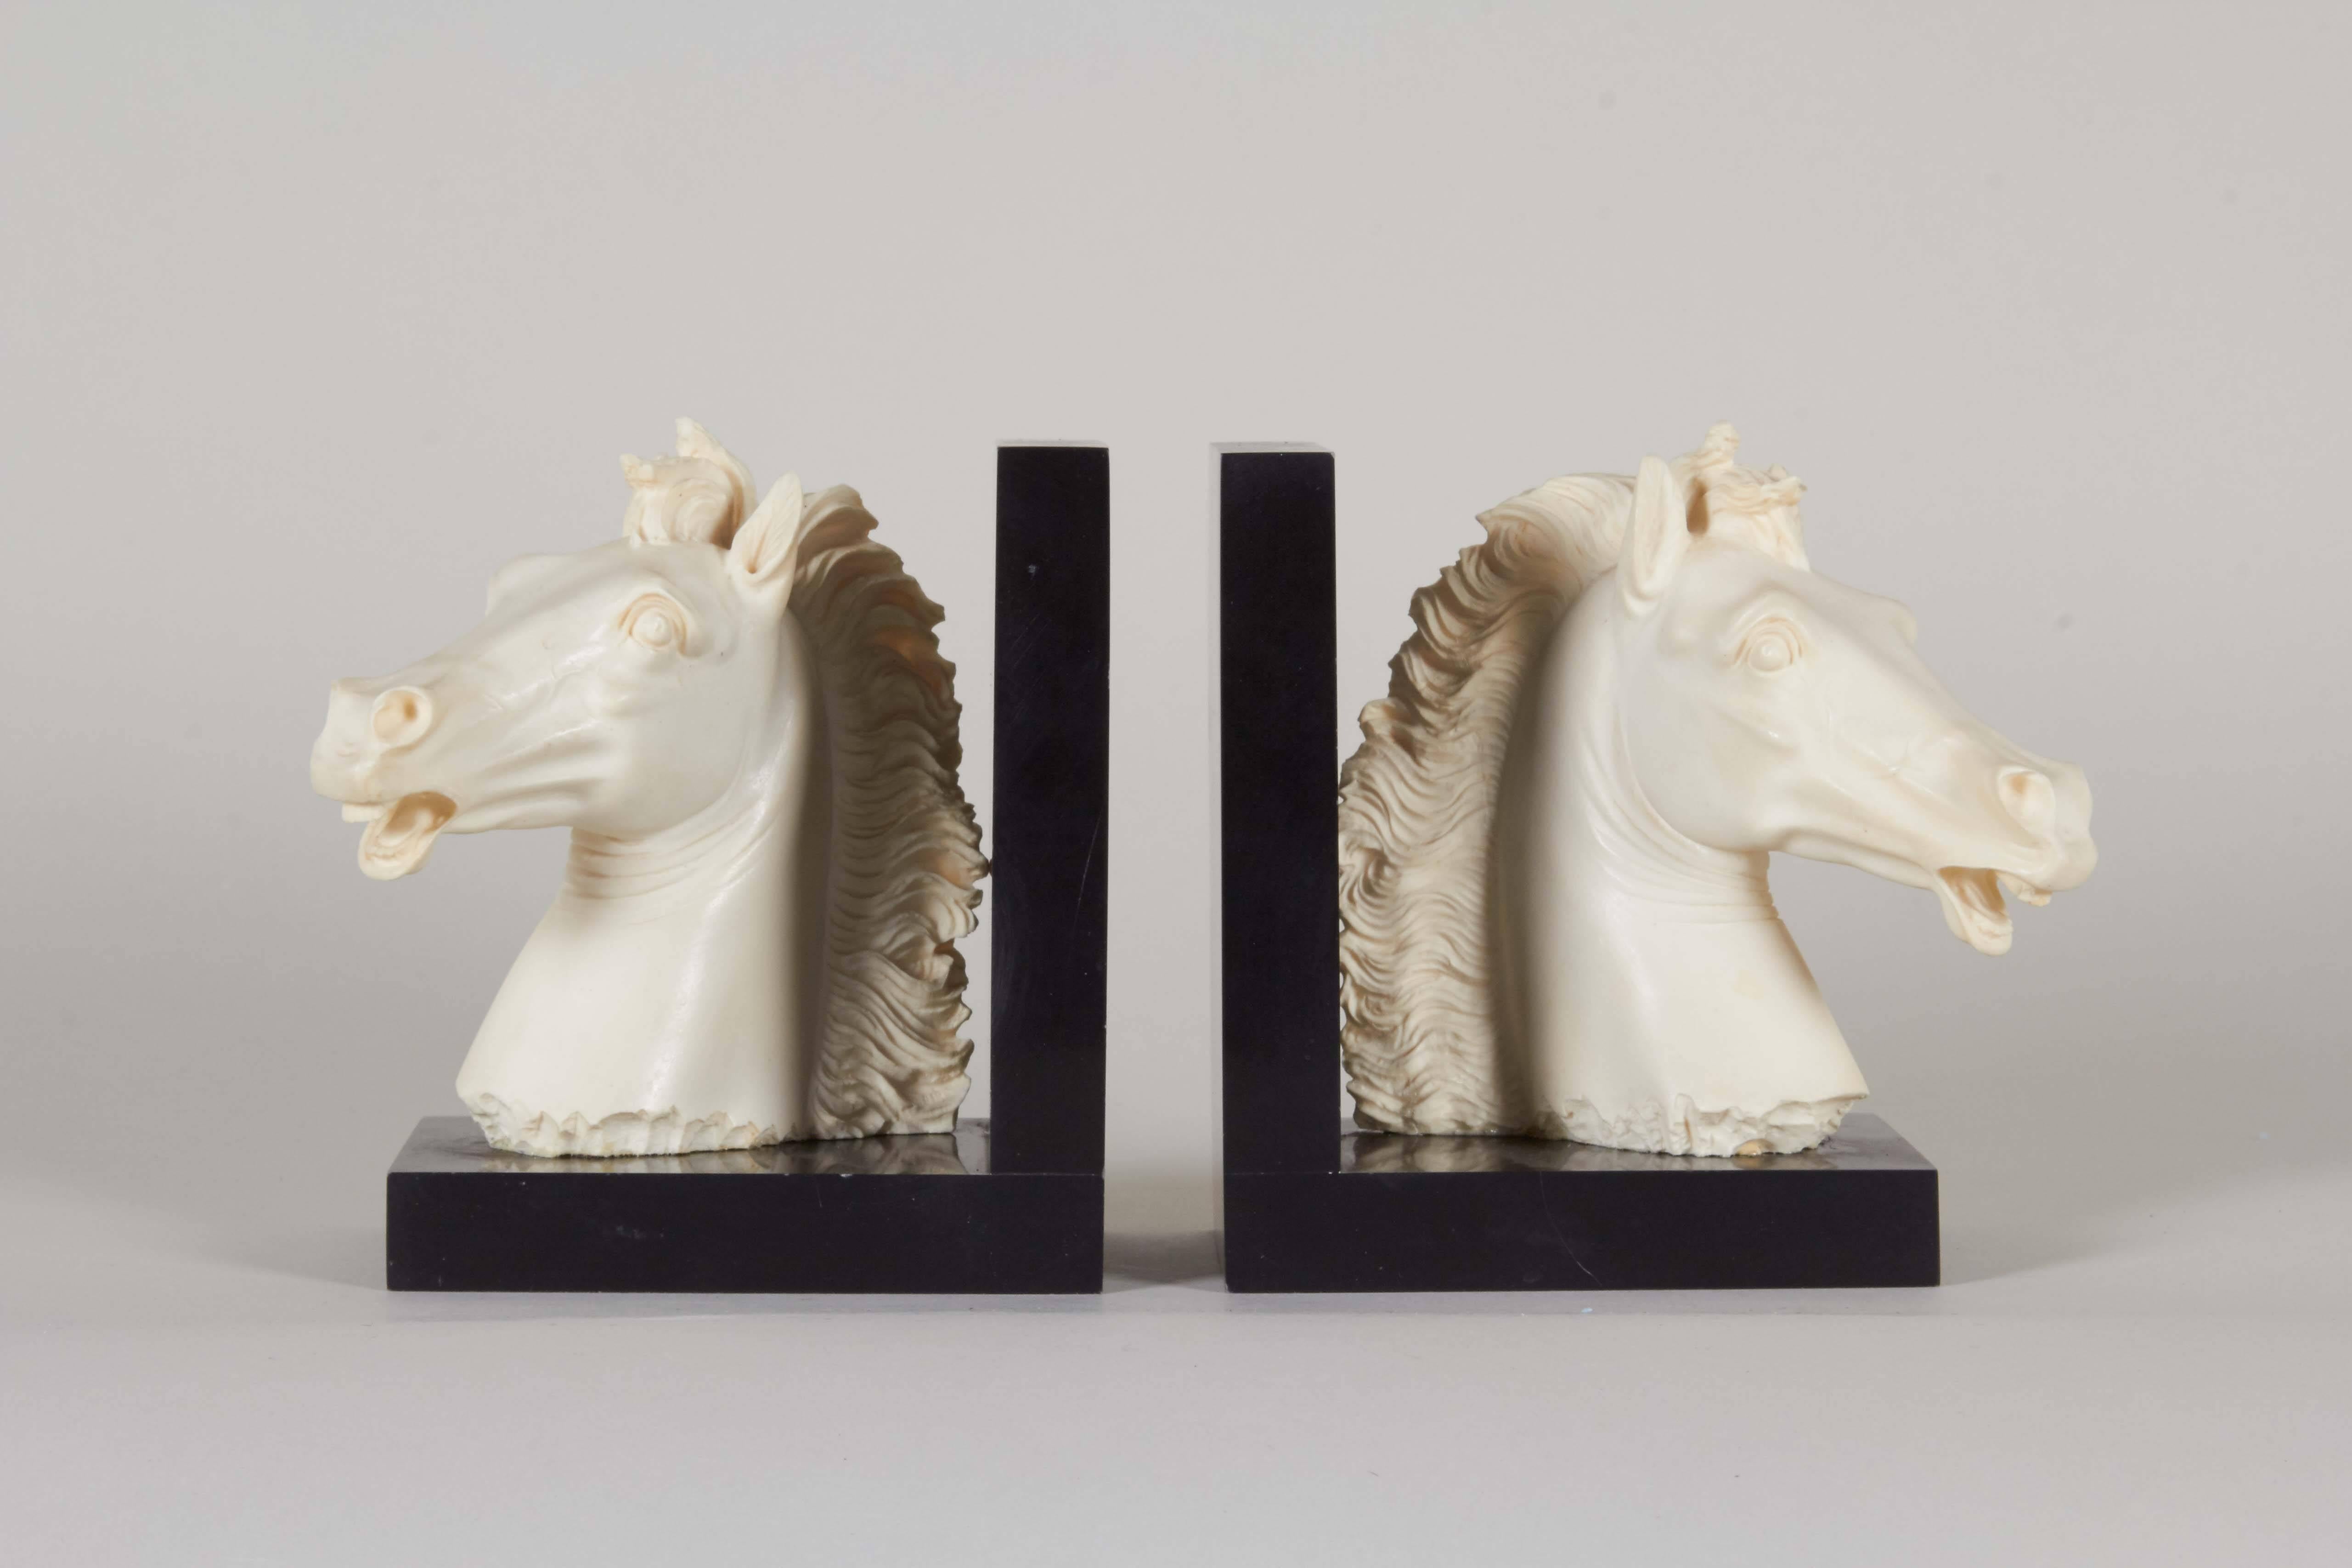 Italian circa 1970s bookends, depicting horse heads crafted of alabaster composite, designed by Arnaldo Giannelli, on black bases. Markings include signature [A Giannelli] and label (albeit worn) [Golden Crown E&R Italy]. Very good condition, wear